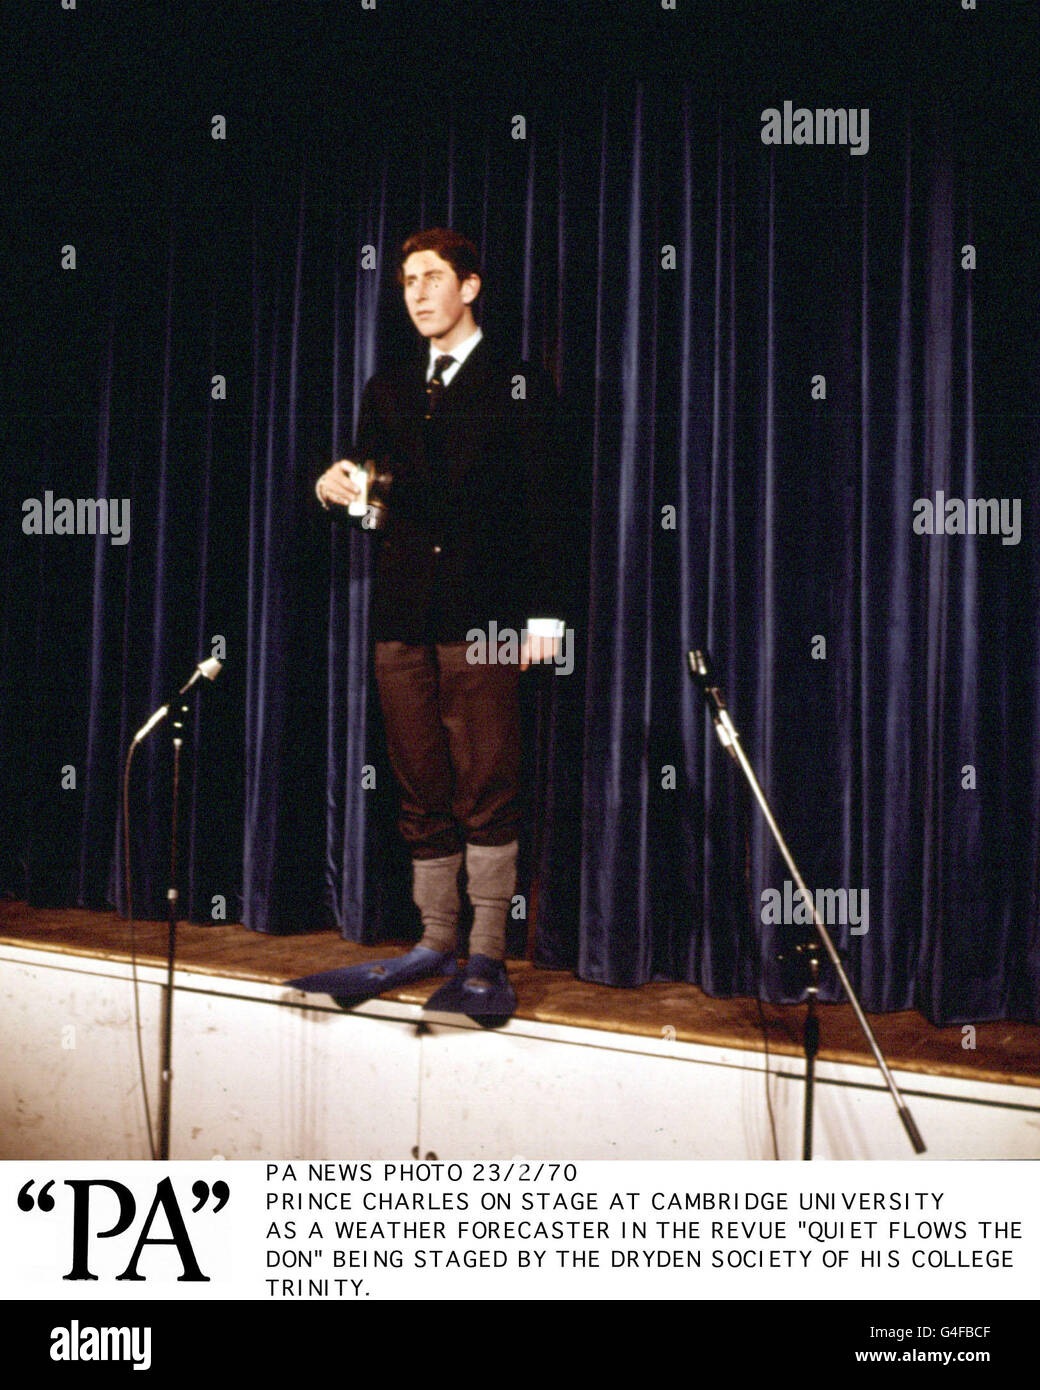 PA NEWS PHOTO 23/2/70 PRINCE CHARLES ON STAGE AT CAMBRIDGE UNIVERSITY AS A WEATHER FORECASTER IN THE REVUE 'QUIET' FLOWS THE DON BEING STAGED BY THE DRYDEN SOCIETY OF HIS COLLEGE TRINITY Stock Photo